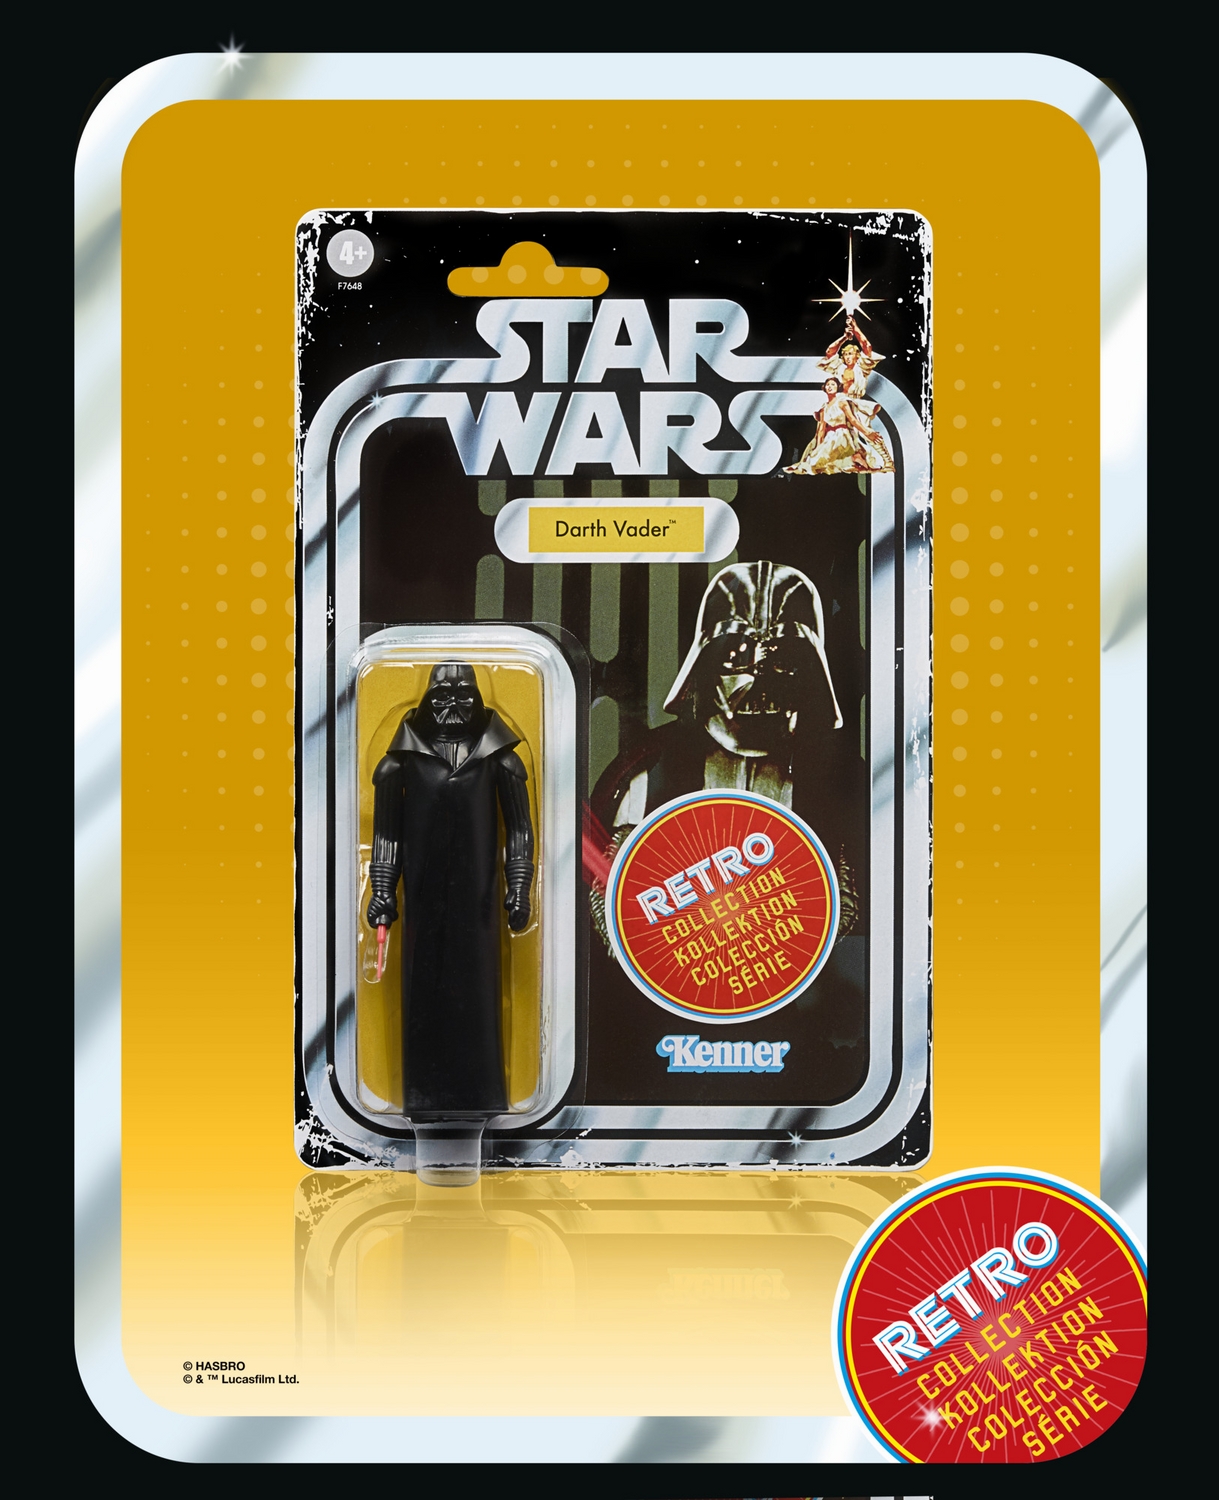 STAR WARS RETRO COLLECTION STAR WARS A NEW HOPE COLLECTIBLE MULTIPACK - 19.jpg